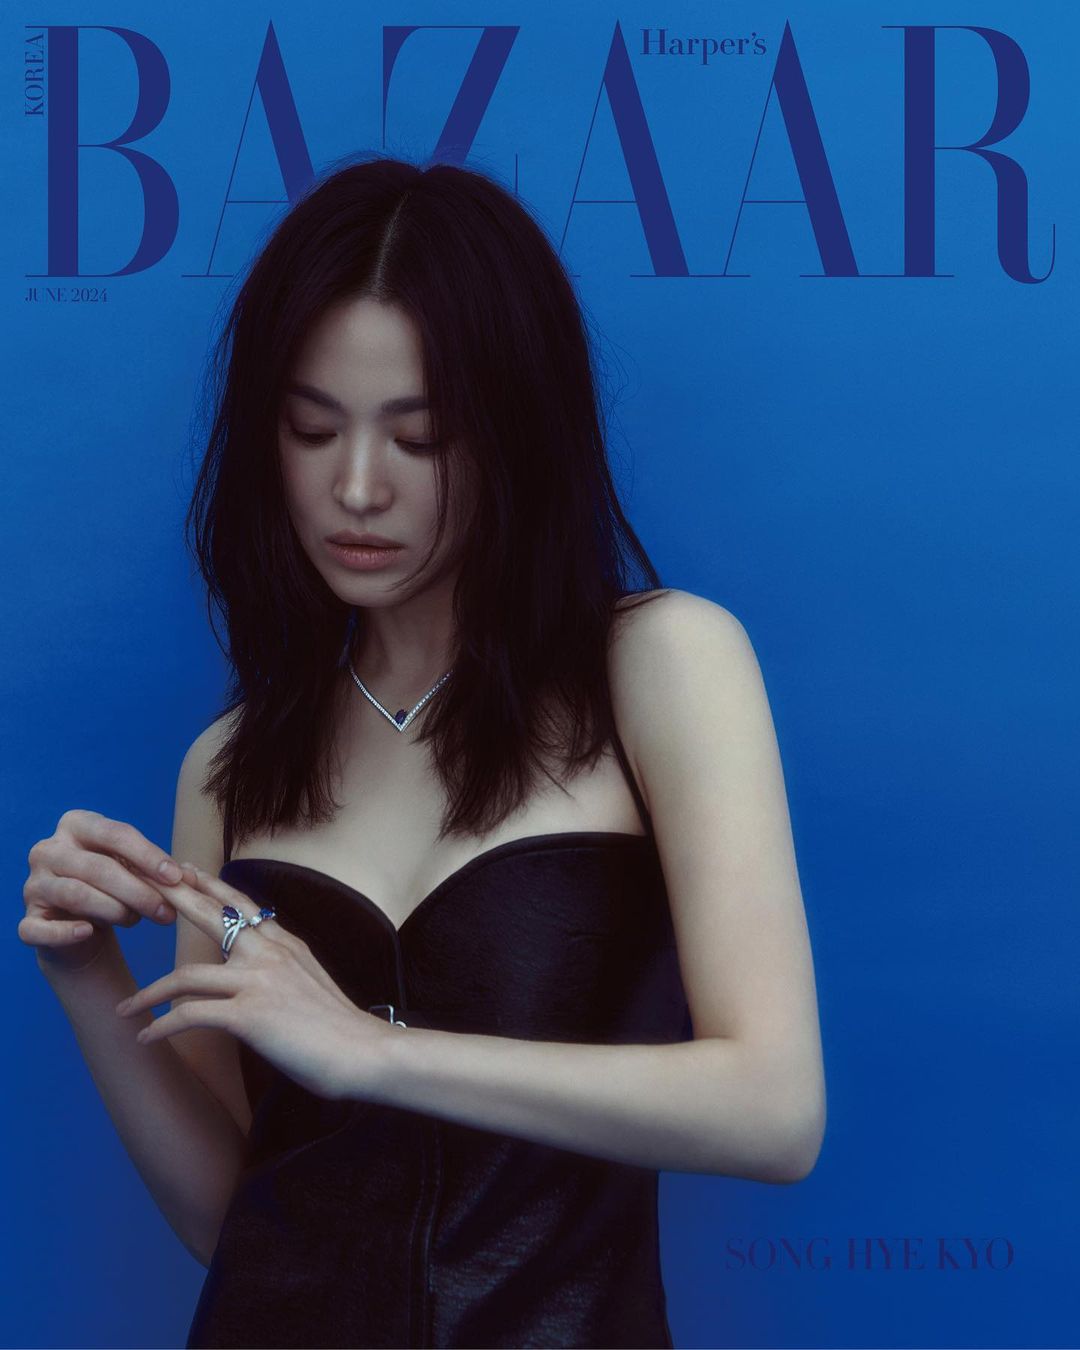 Song Hye Kyo Shares Her Thoughts On Aging, Her Past And Upcoming Projects, And More